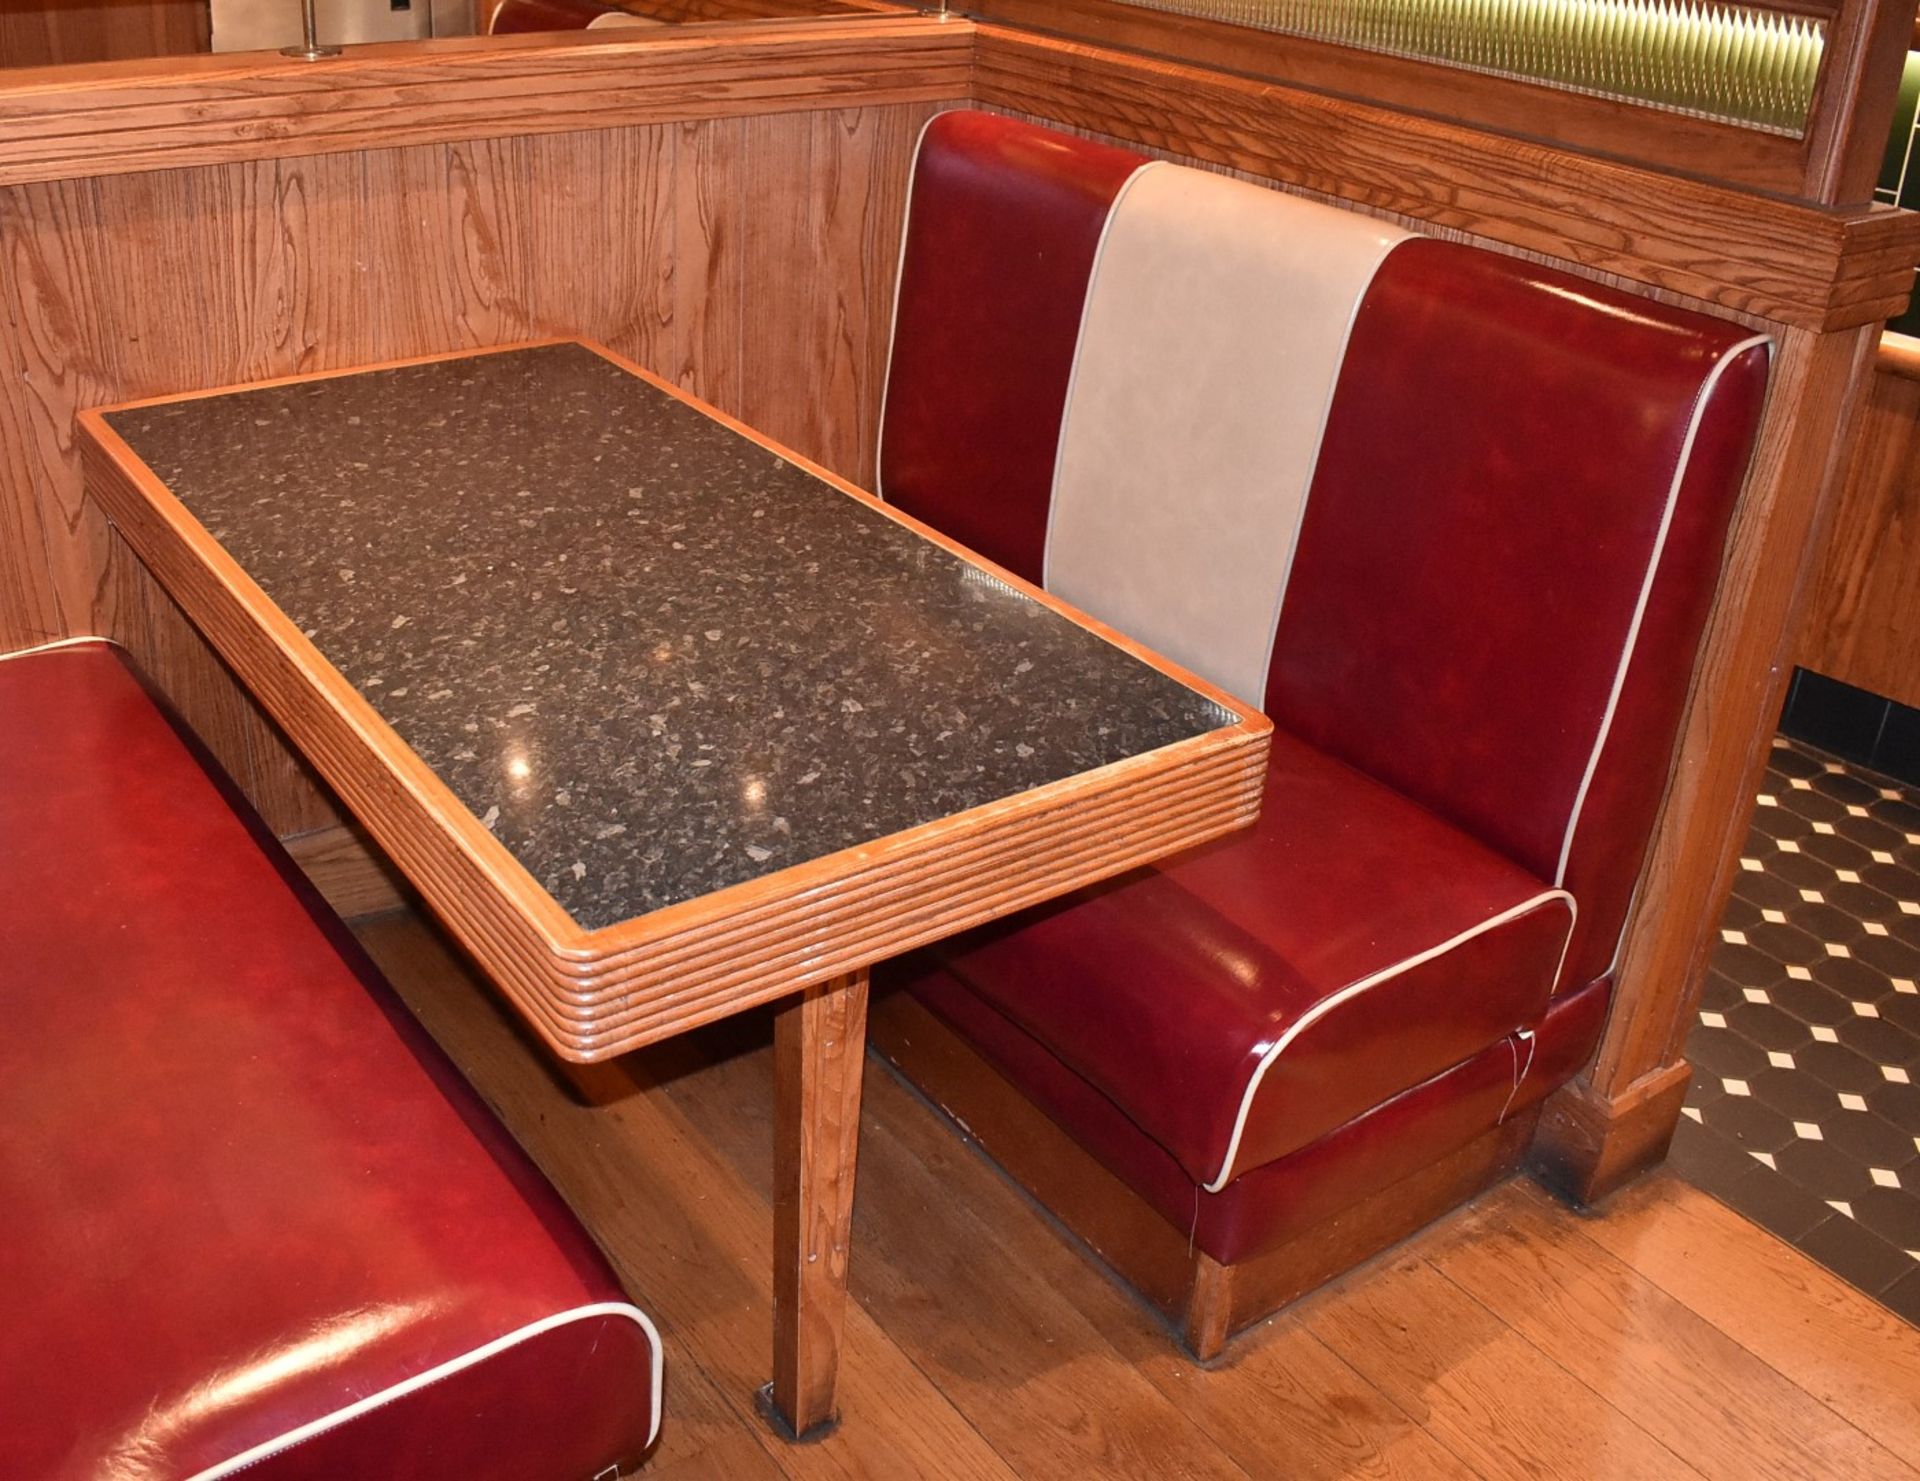 Selection of Double Seating Benches and Dining Tables to Seat Upto 12 Persons - Image 7 of 8